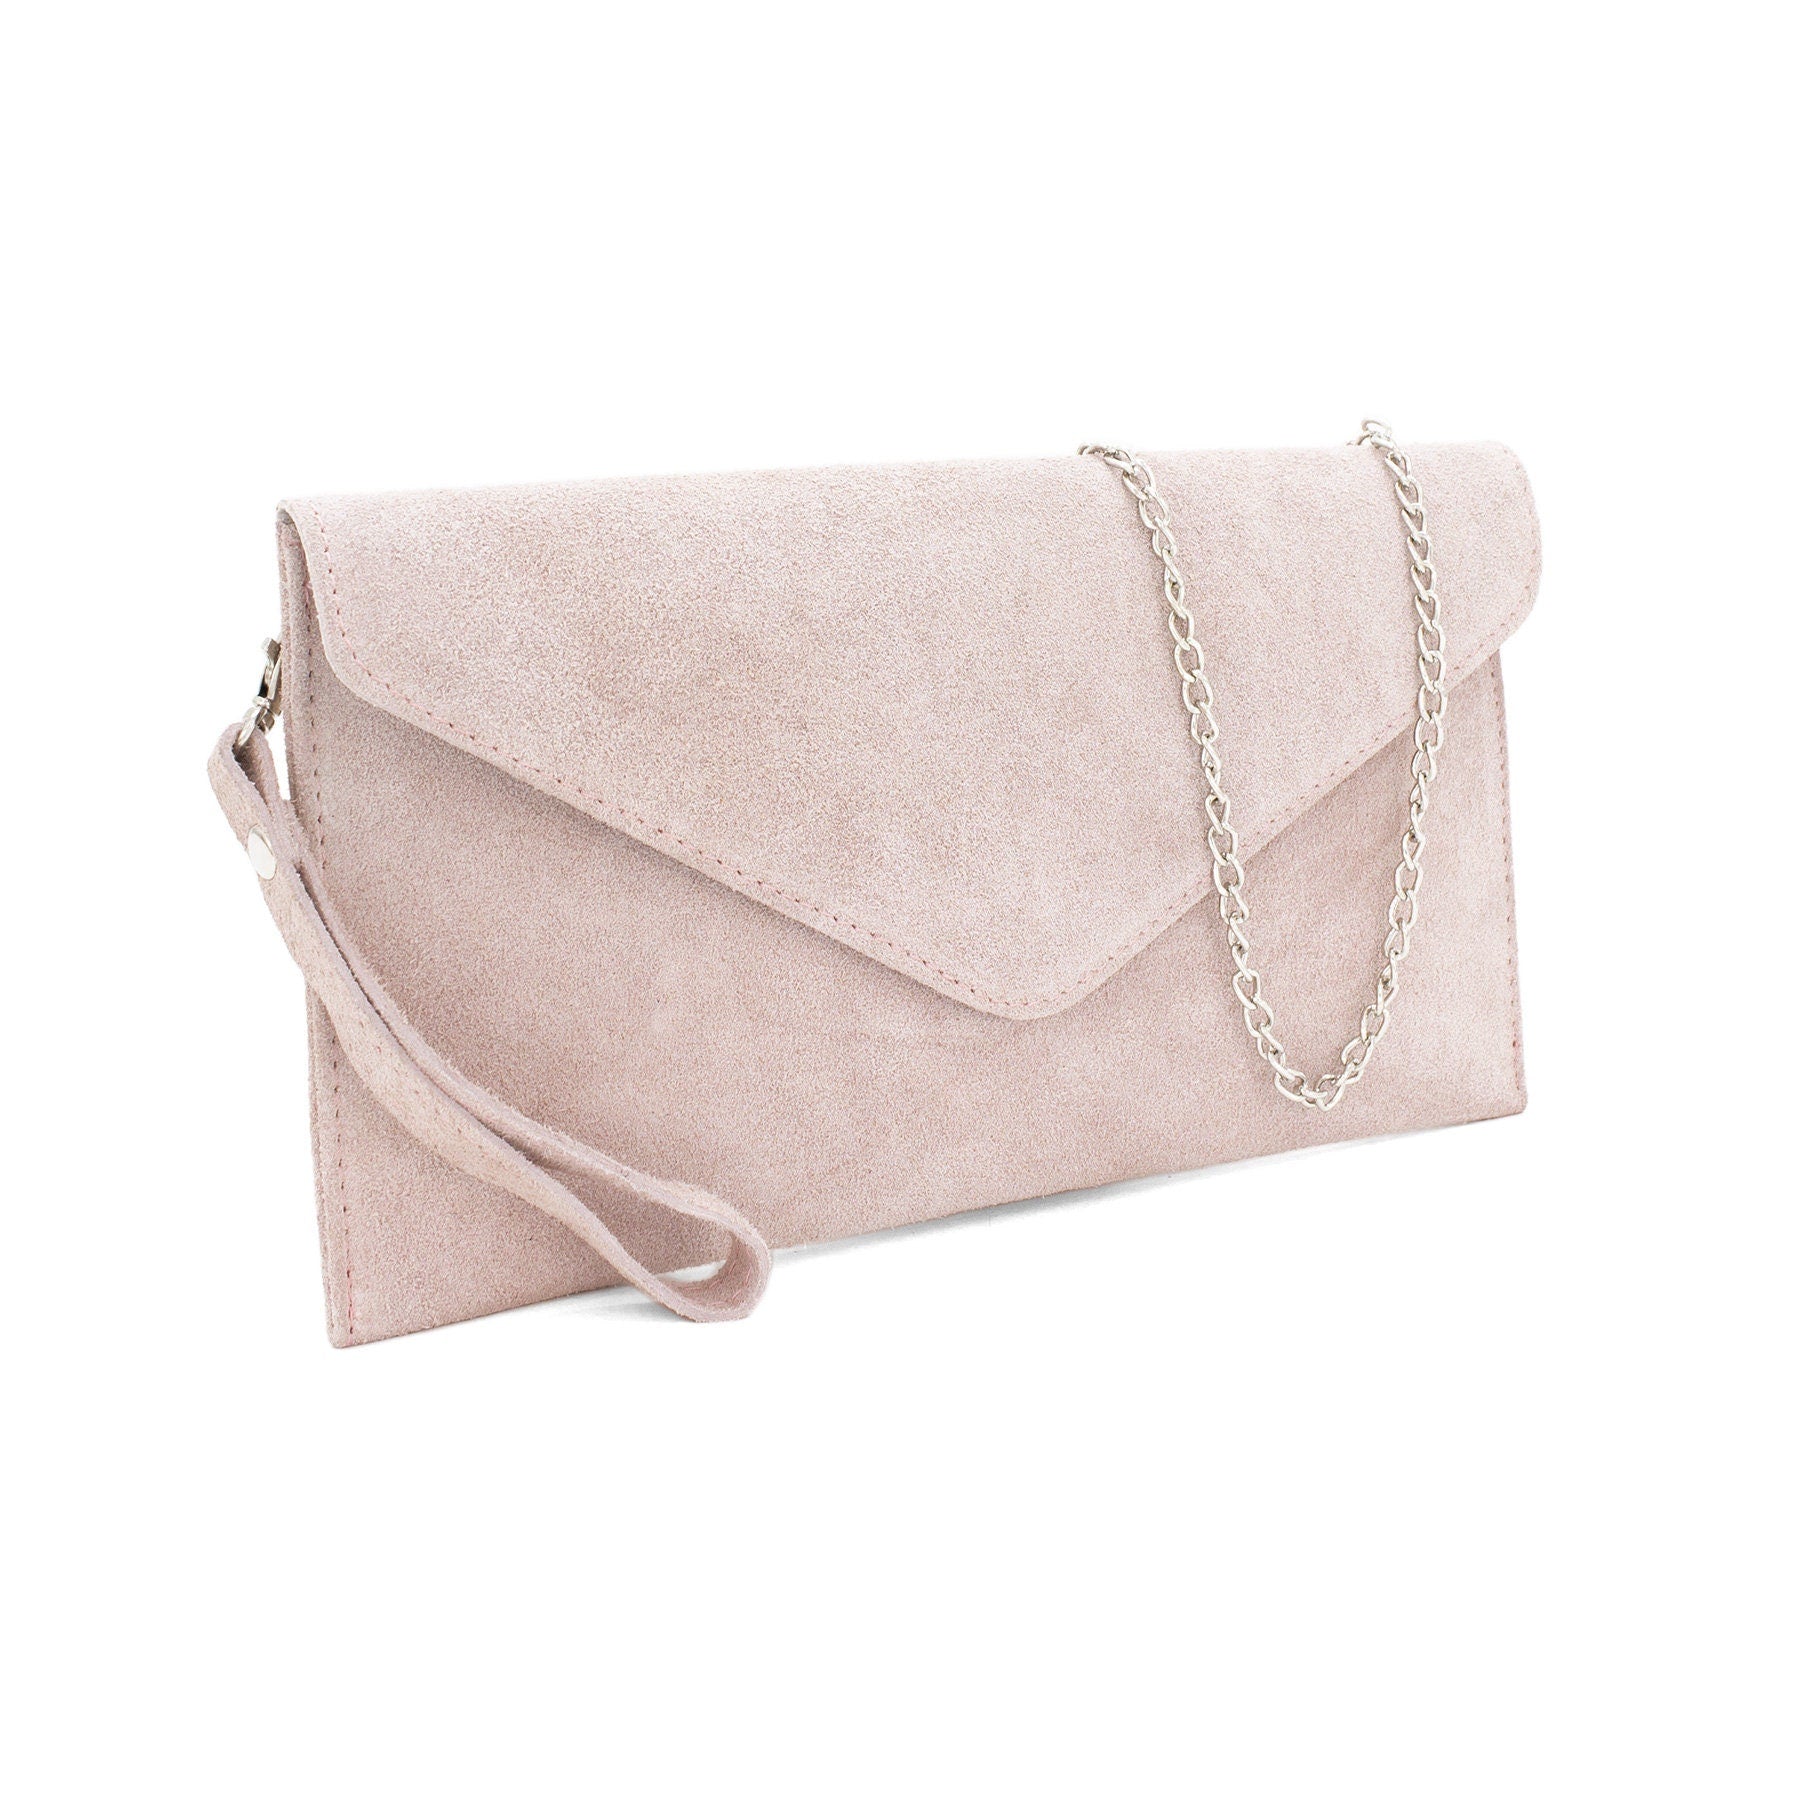  Nude envelope clutch bag with chain strap